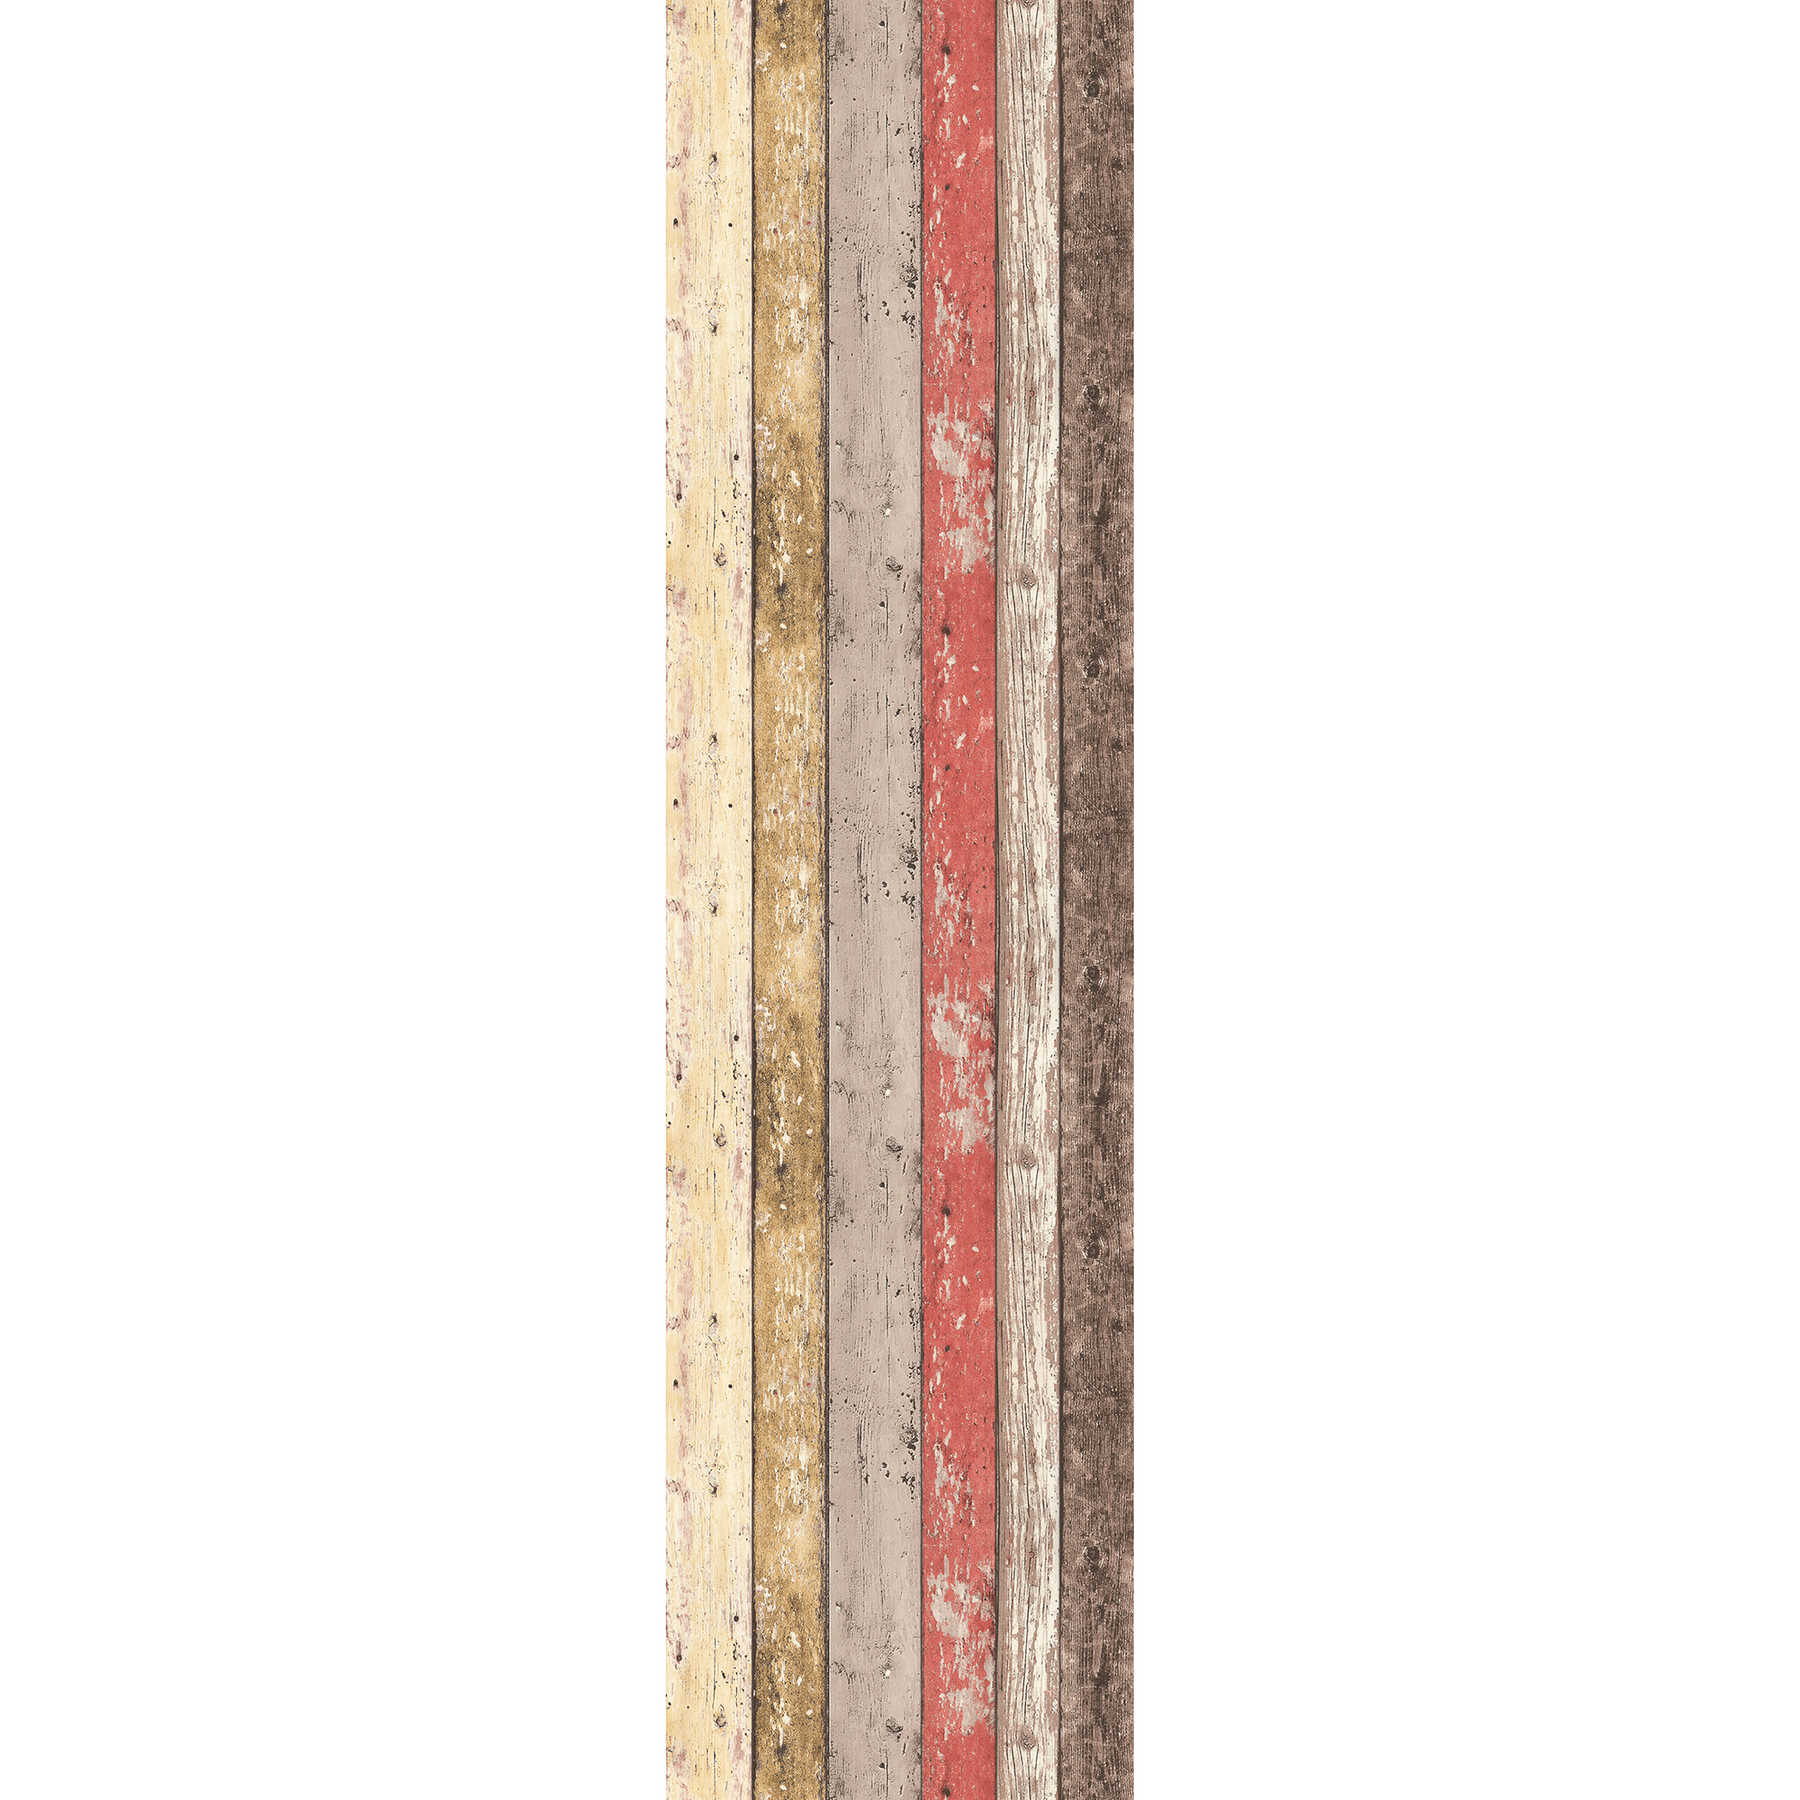         Non-woven wallpaper wood boards in Shabby Chic style - brown, red
    